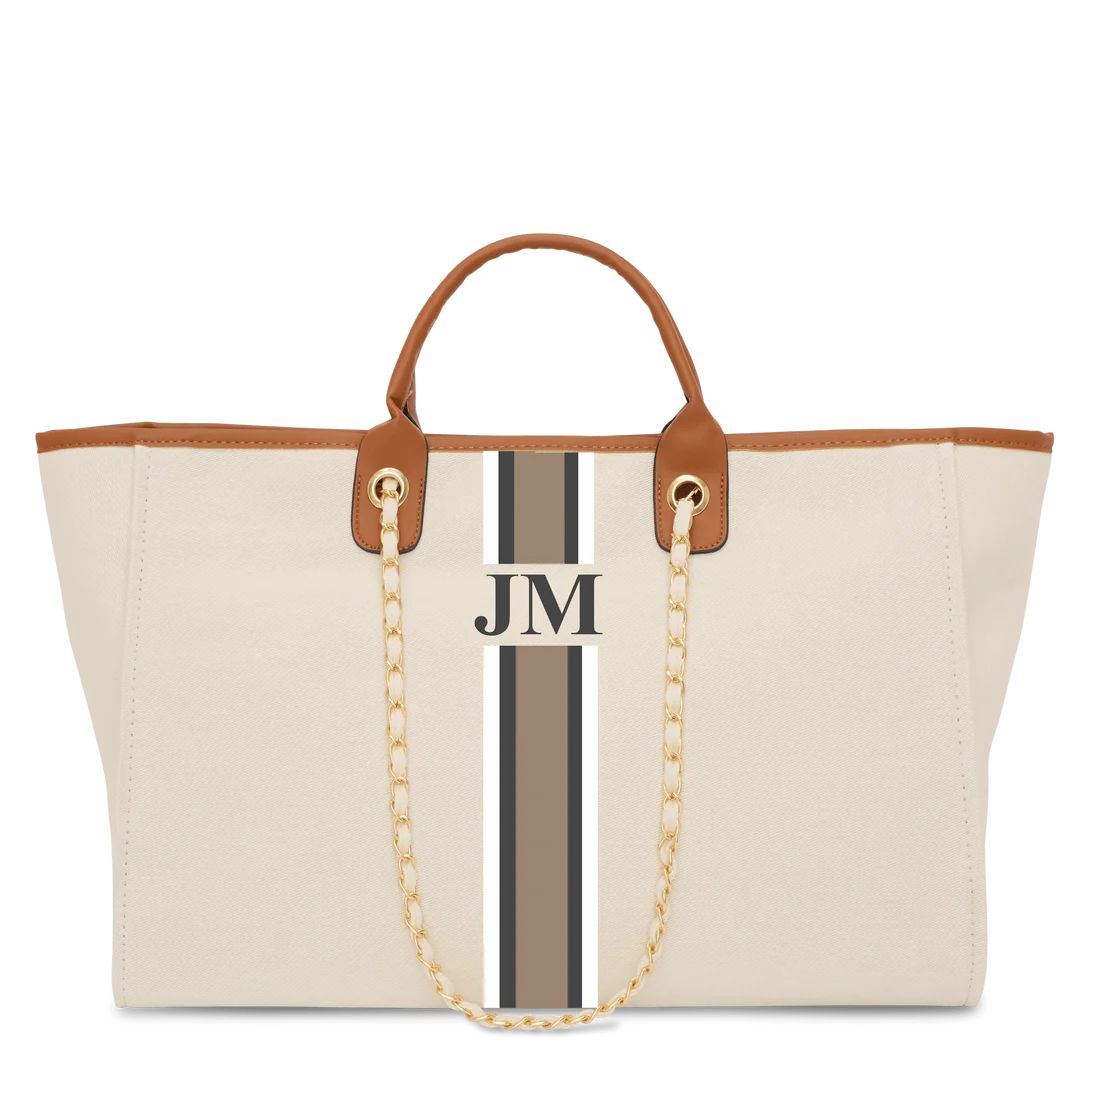 Lily & Bean Canvas Chain Tote Bag Cream - Light Tan Handles & Gold Det | Lily and Bean